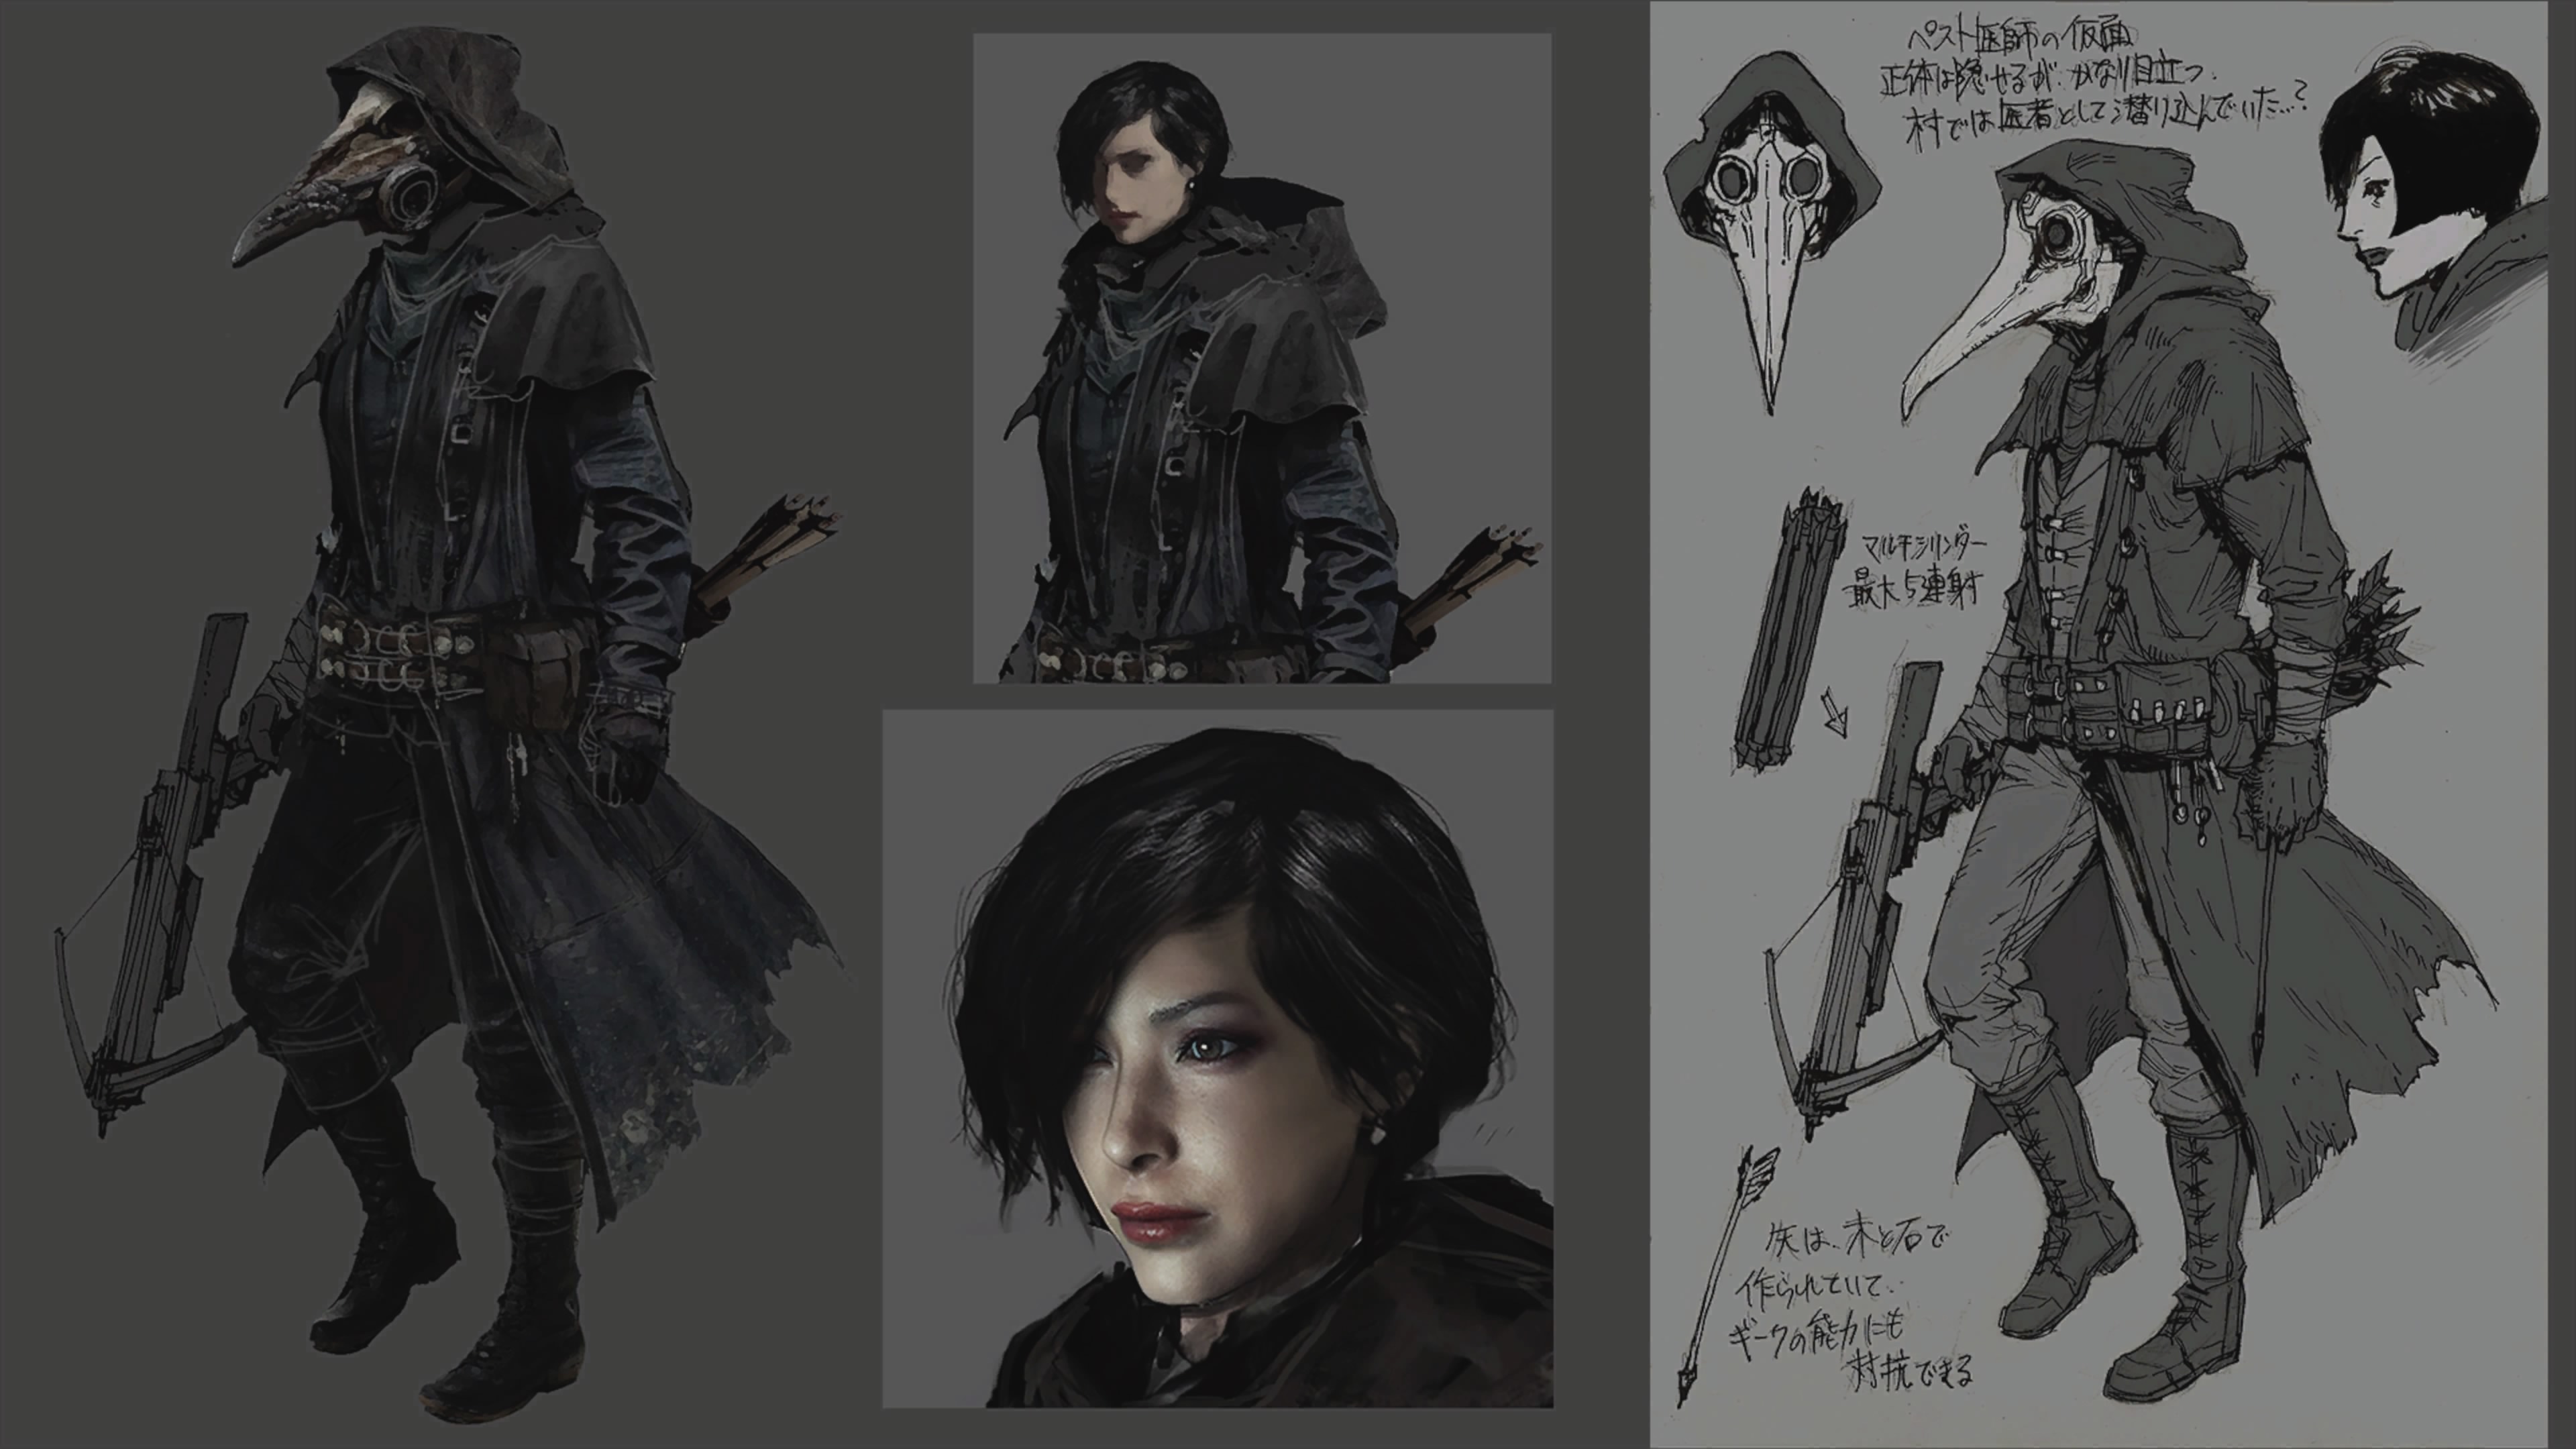 Resident Evil Village Almost Included Ada Wong, Concept Art Shows - GameSpot